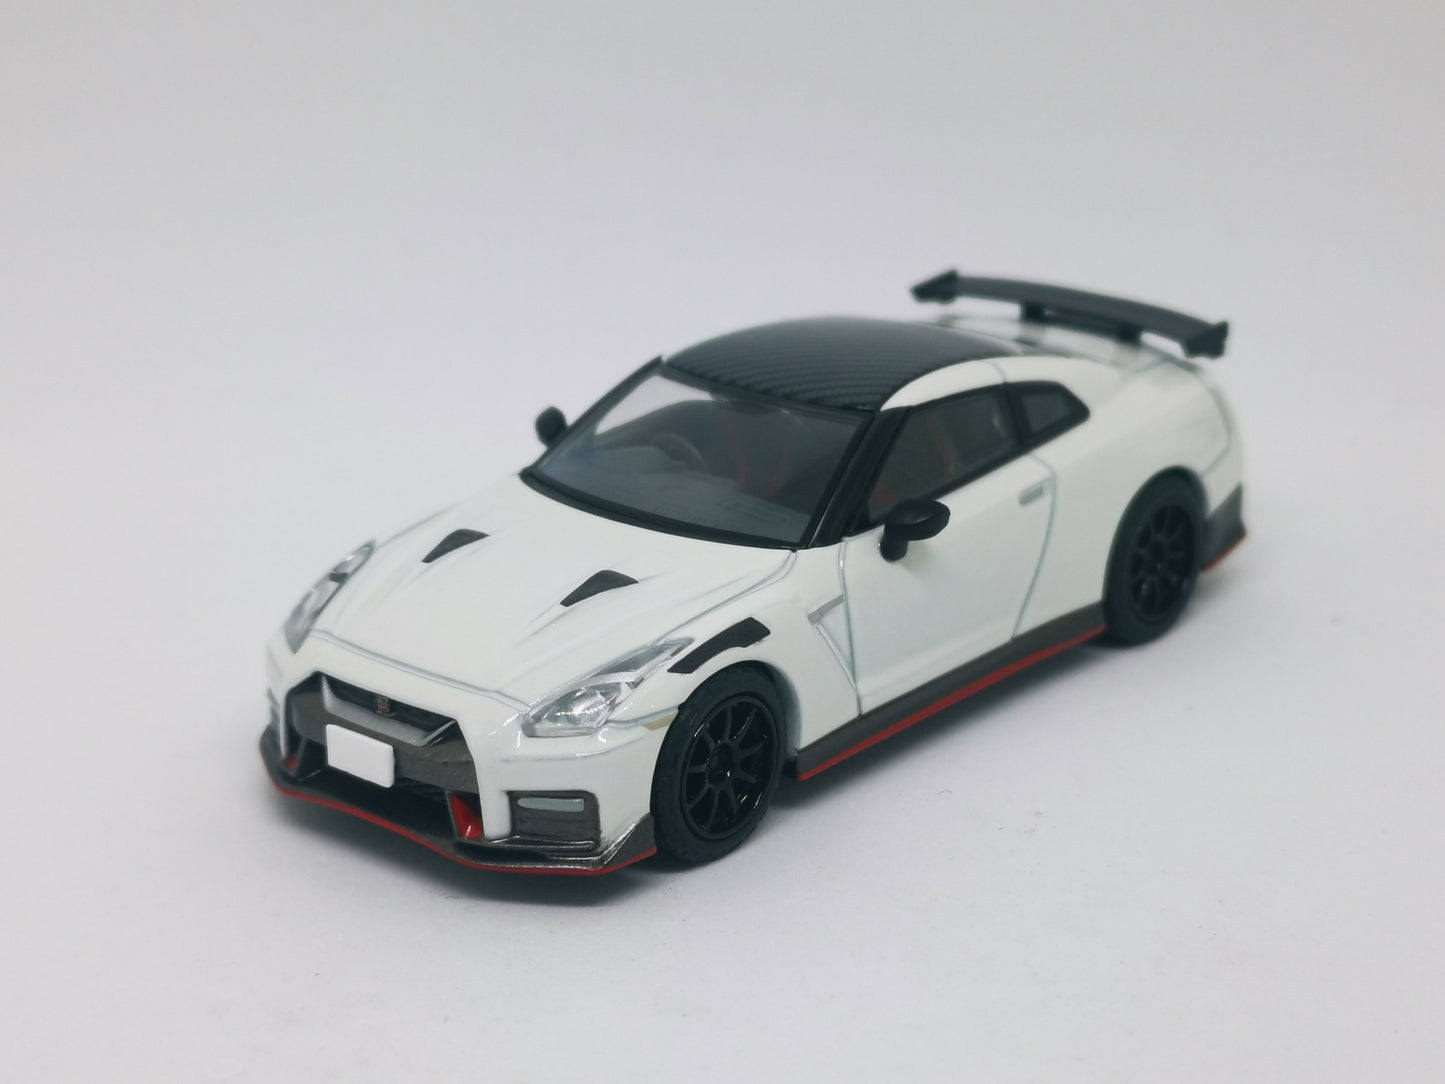 Tomica Limited Vintage Neo LV-N217a Nissan GT-R Nismo 2020 Model White